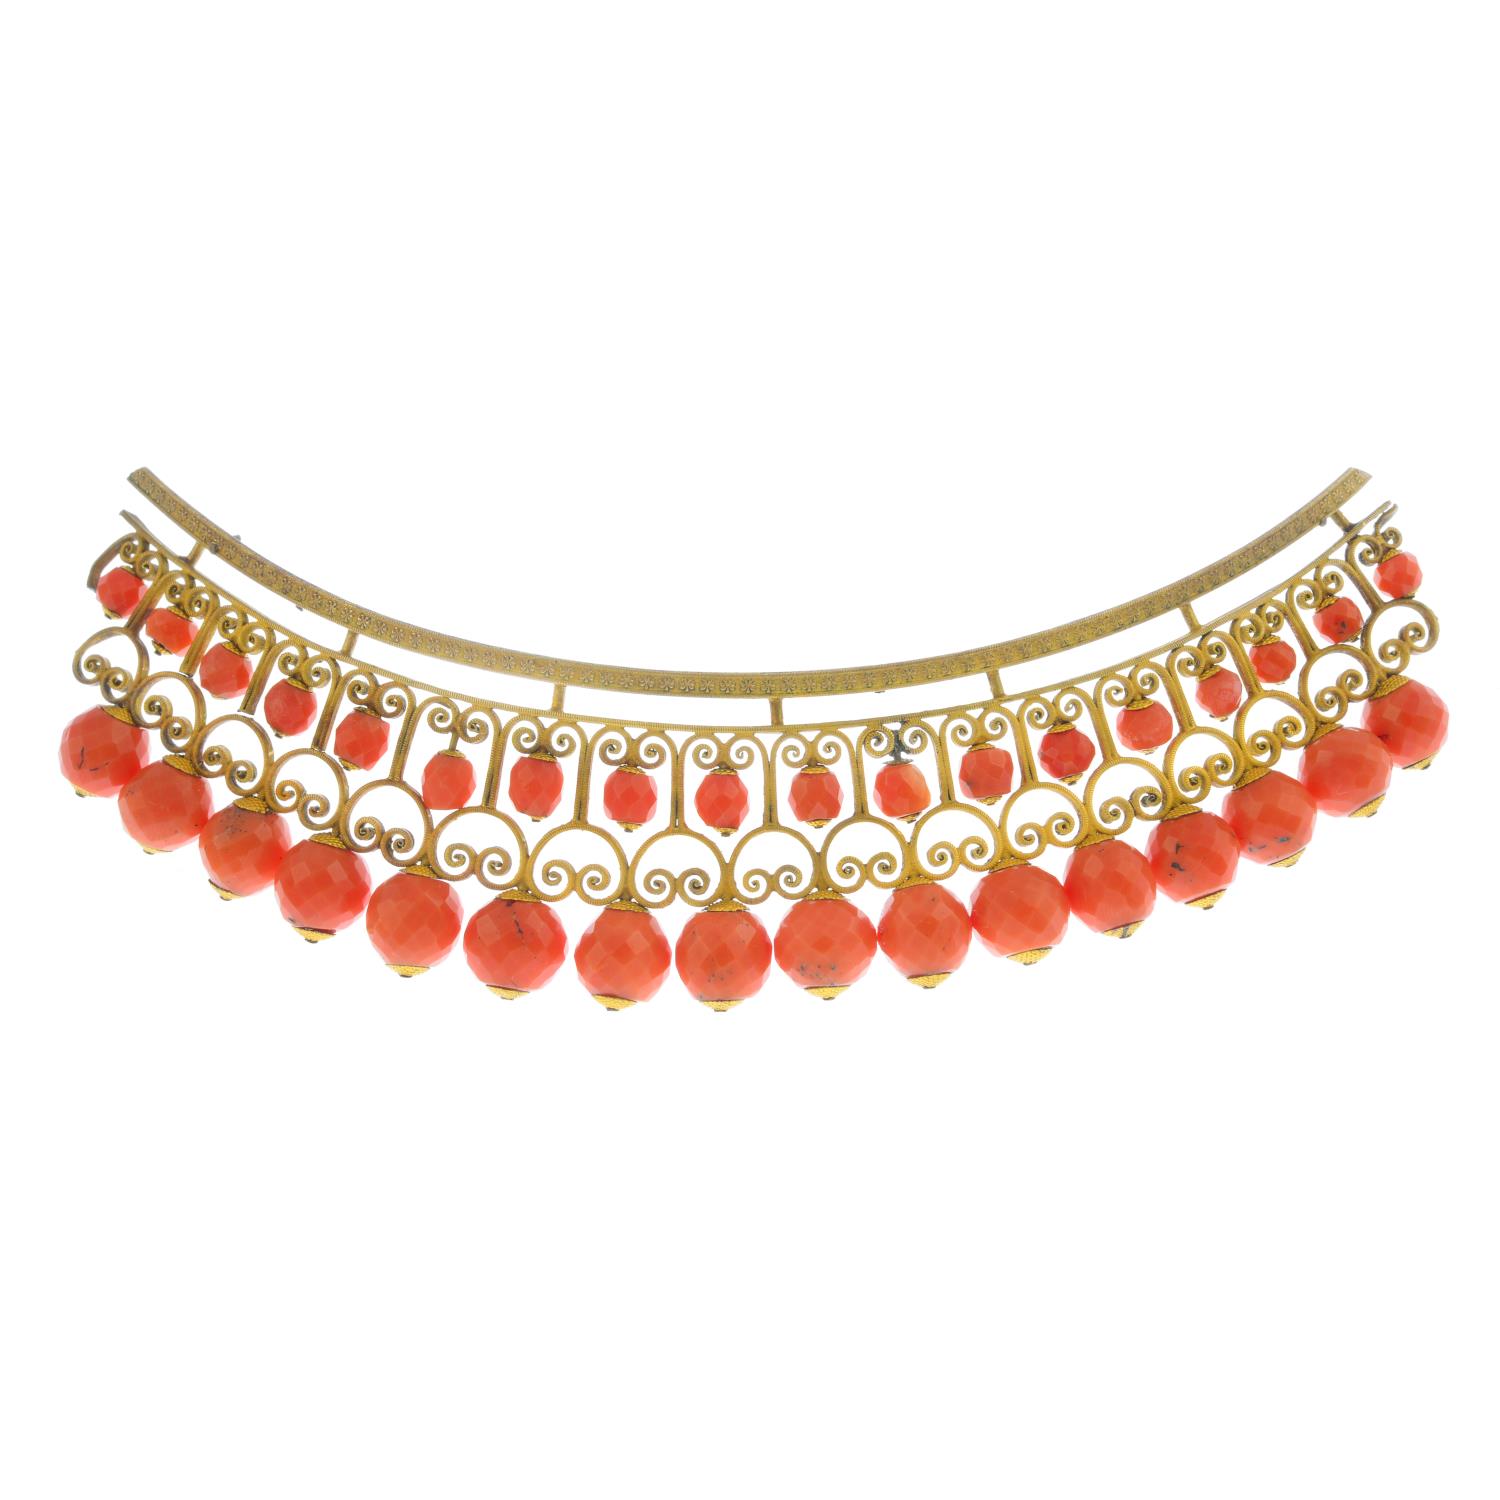 A late Georgian 15ct gold coral hair comb. Of openwork design, with faceted coral bead highlights.